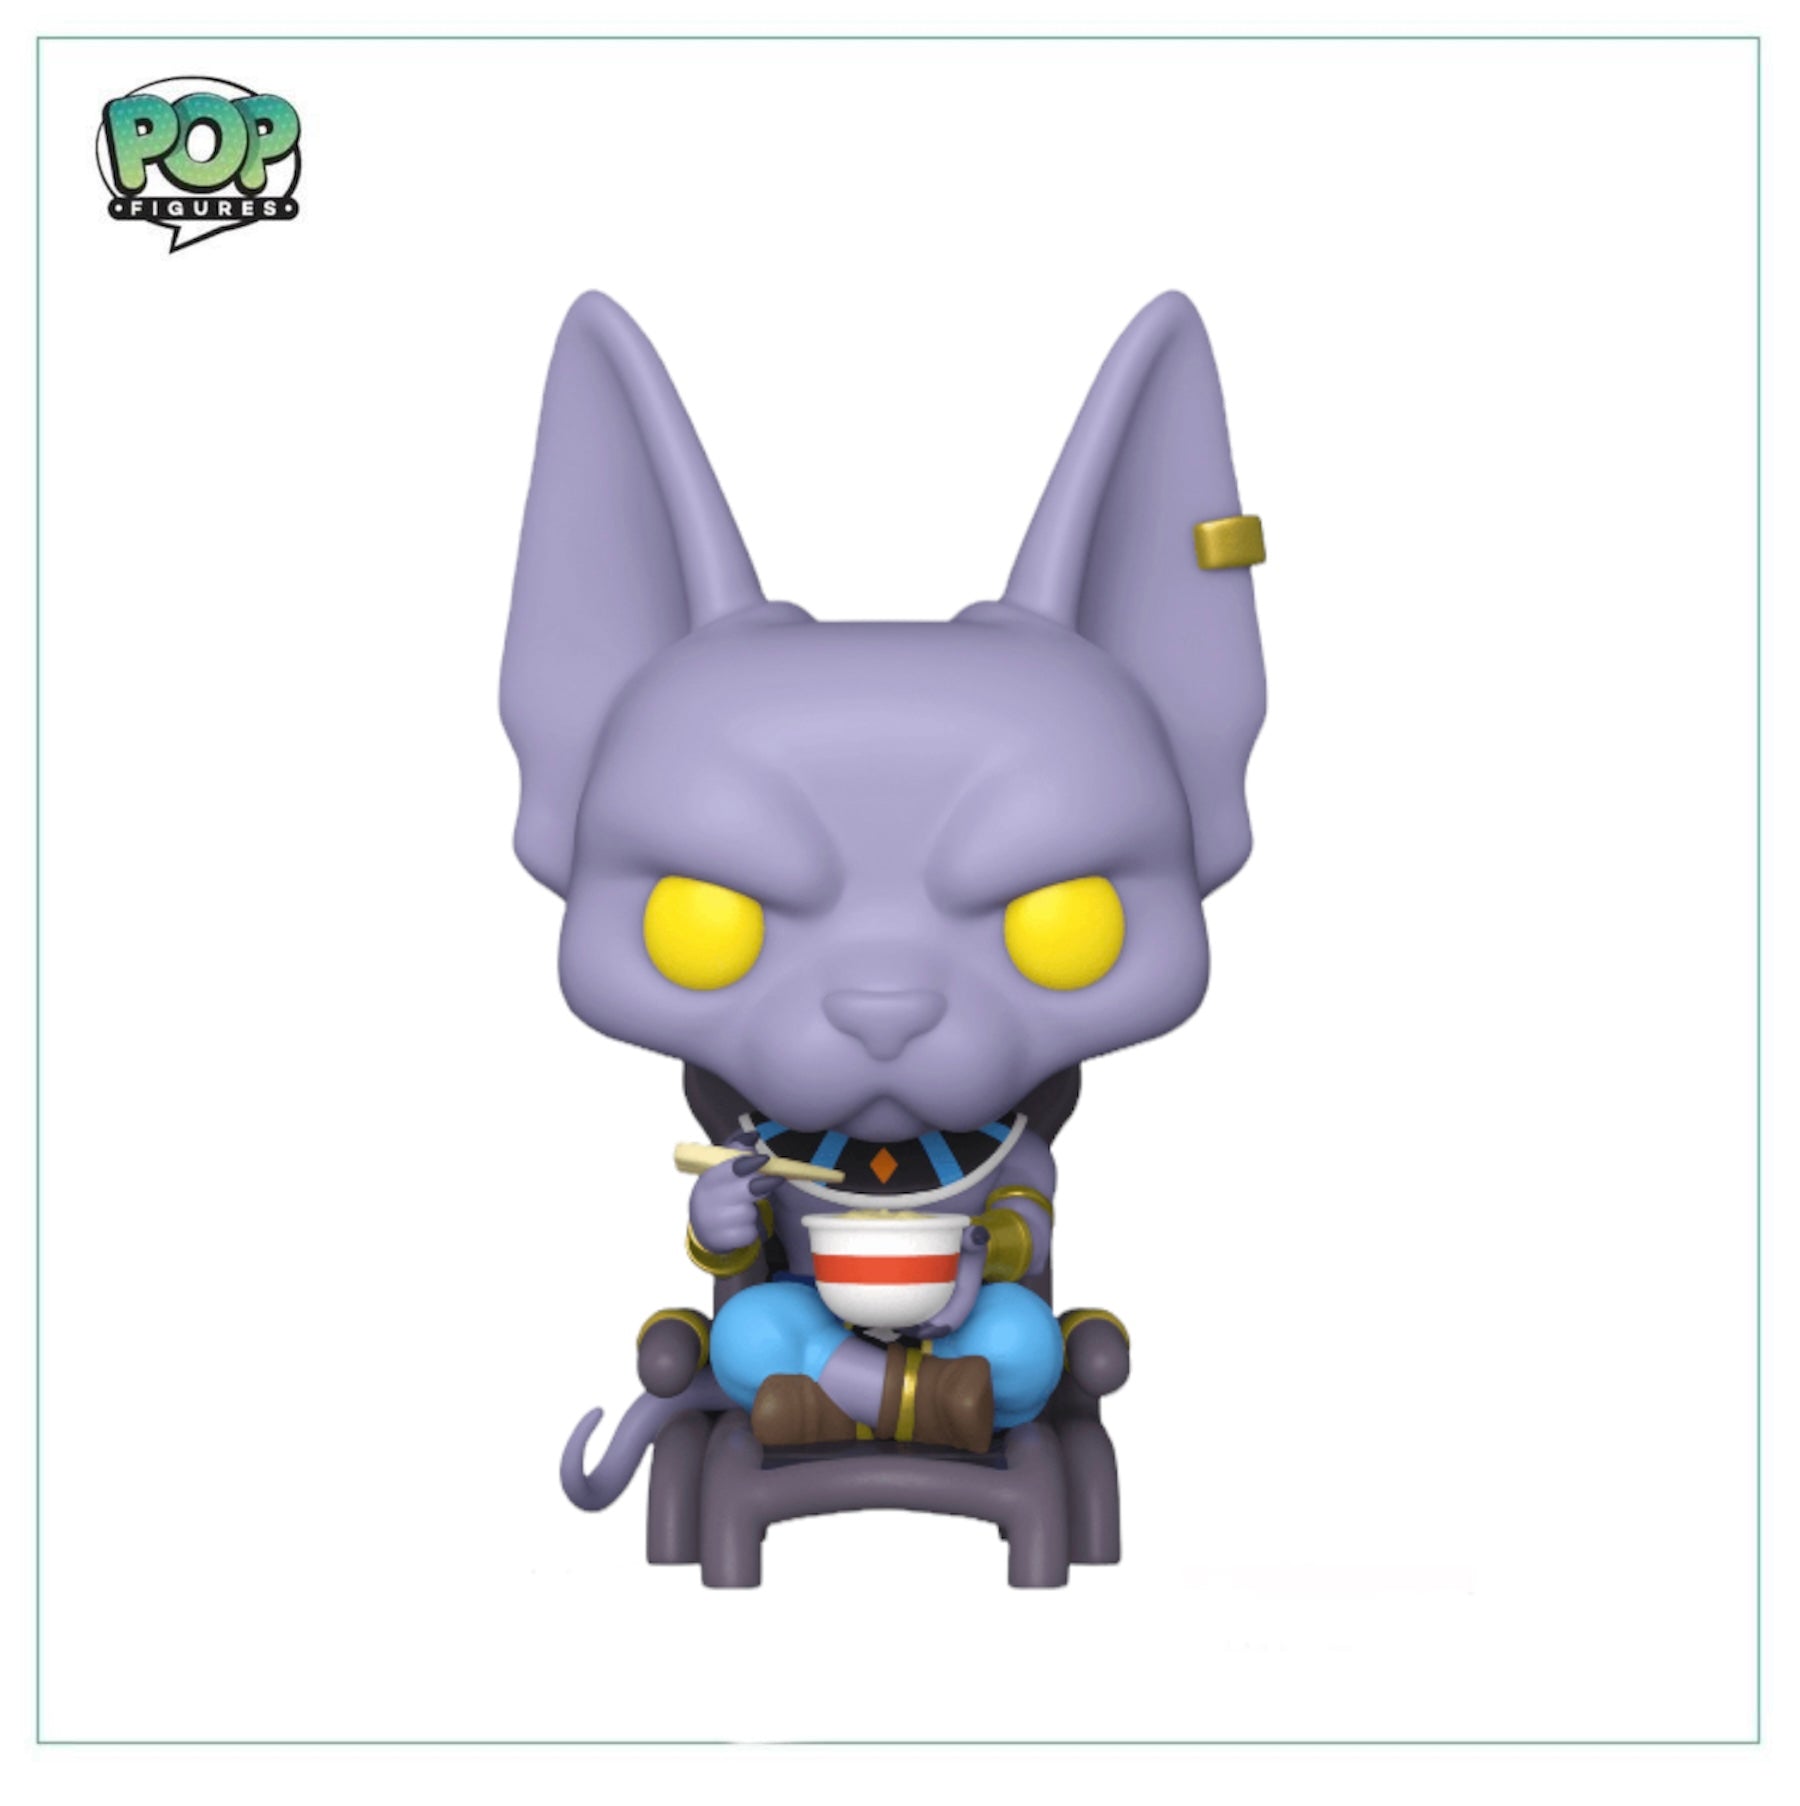 Beerus (Eating Noodles) #1110 Funko Pop! - Dragon Ball Super - Hot Topic Exclusive